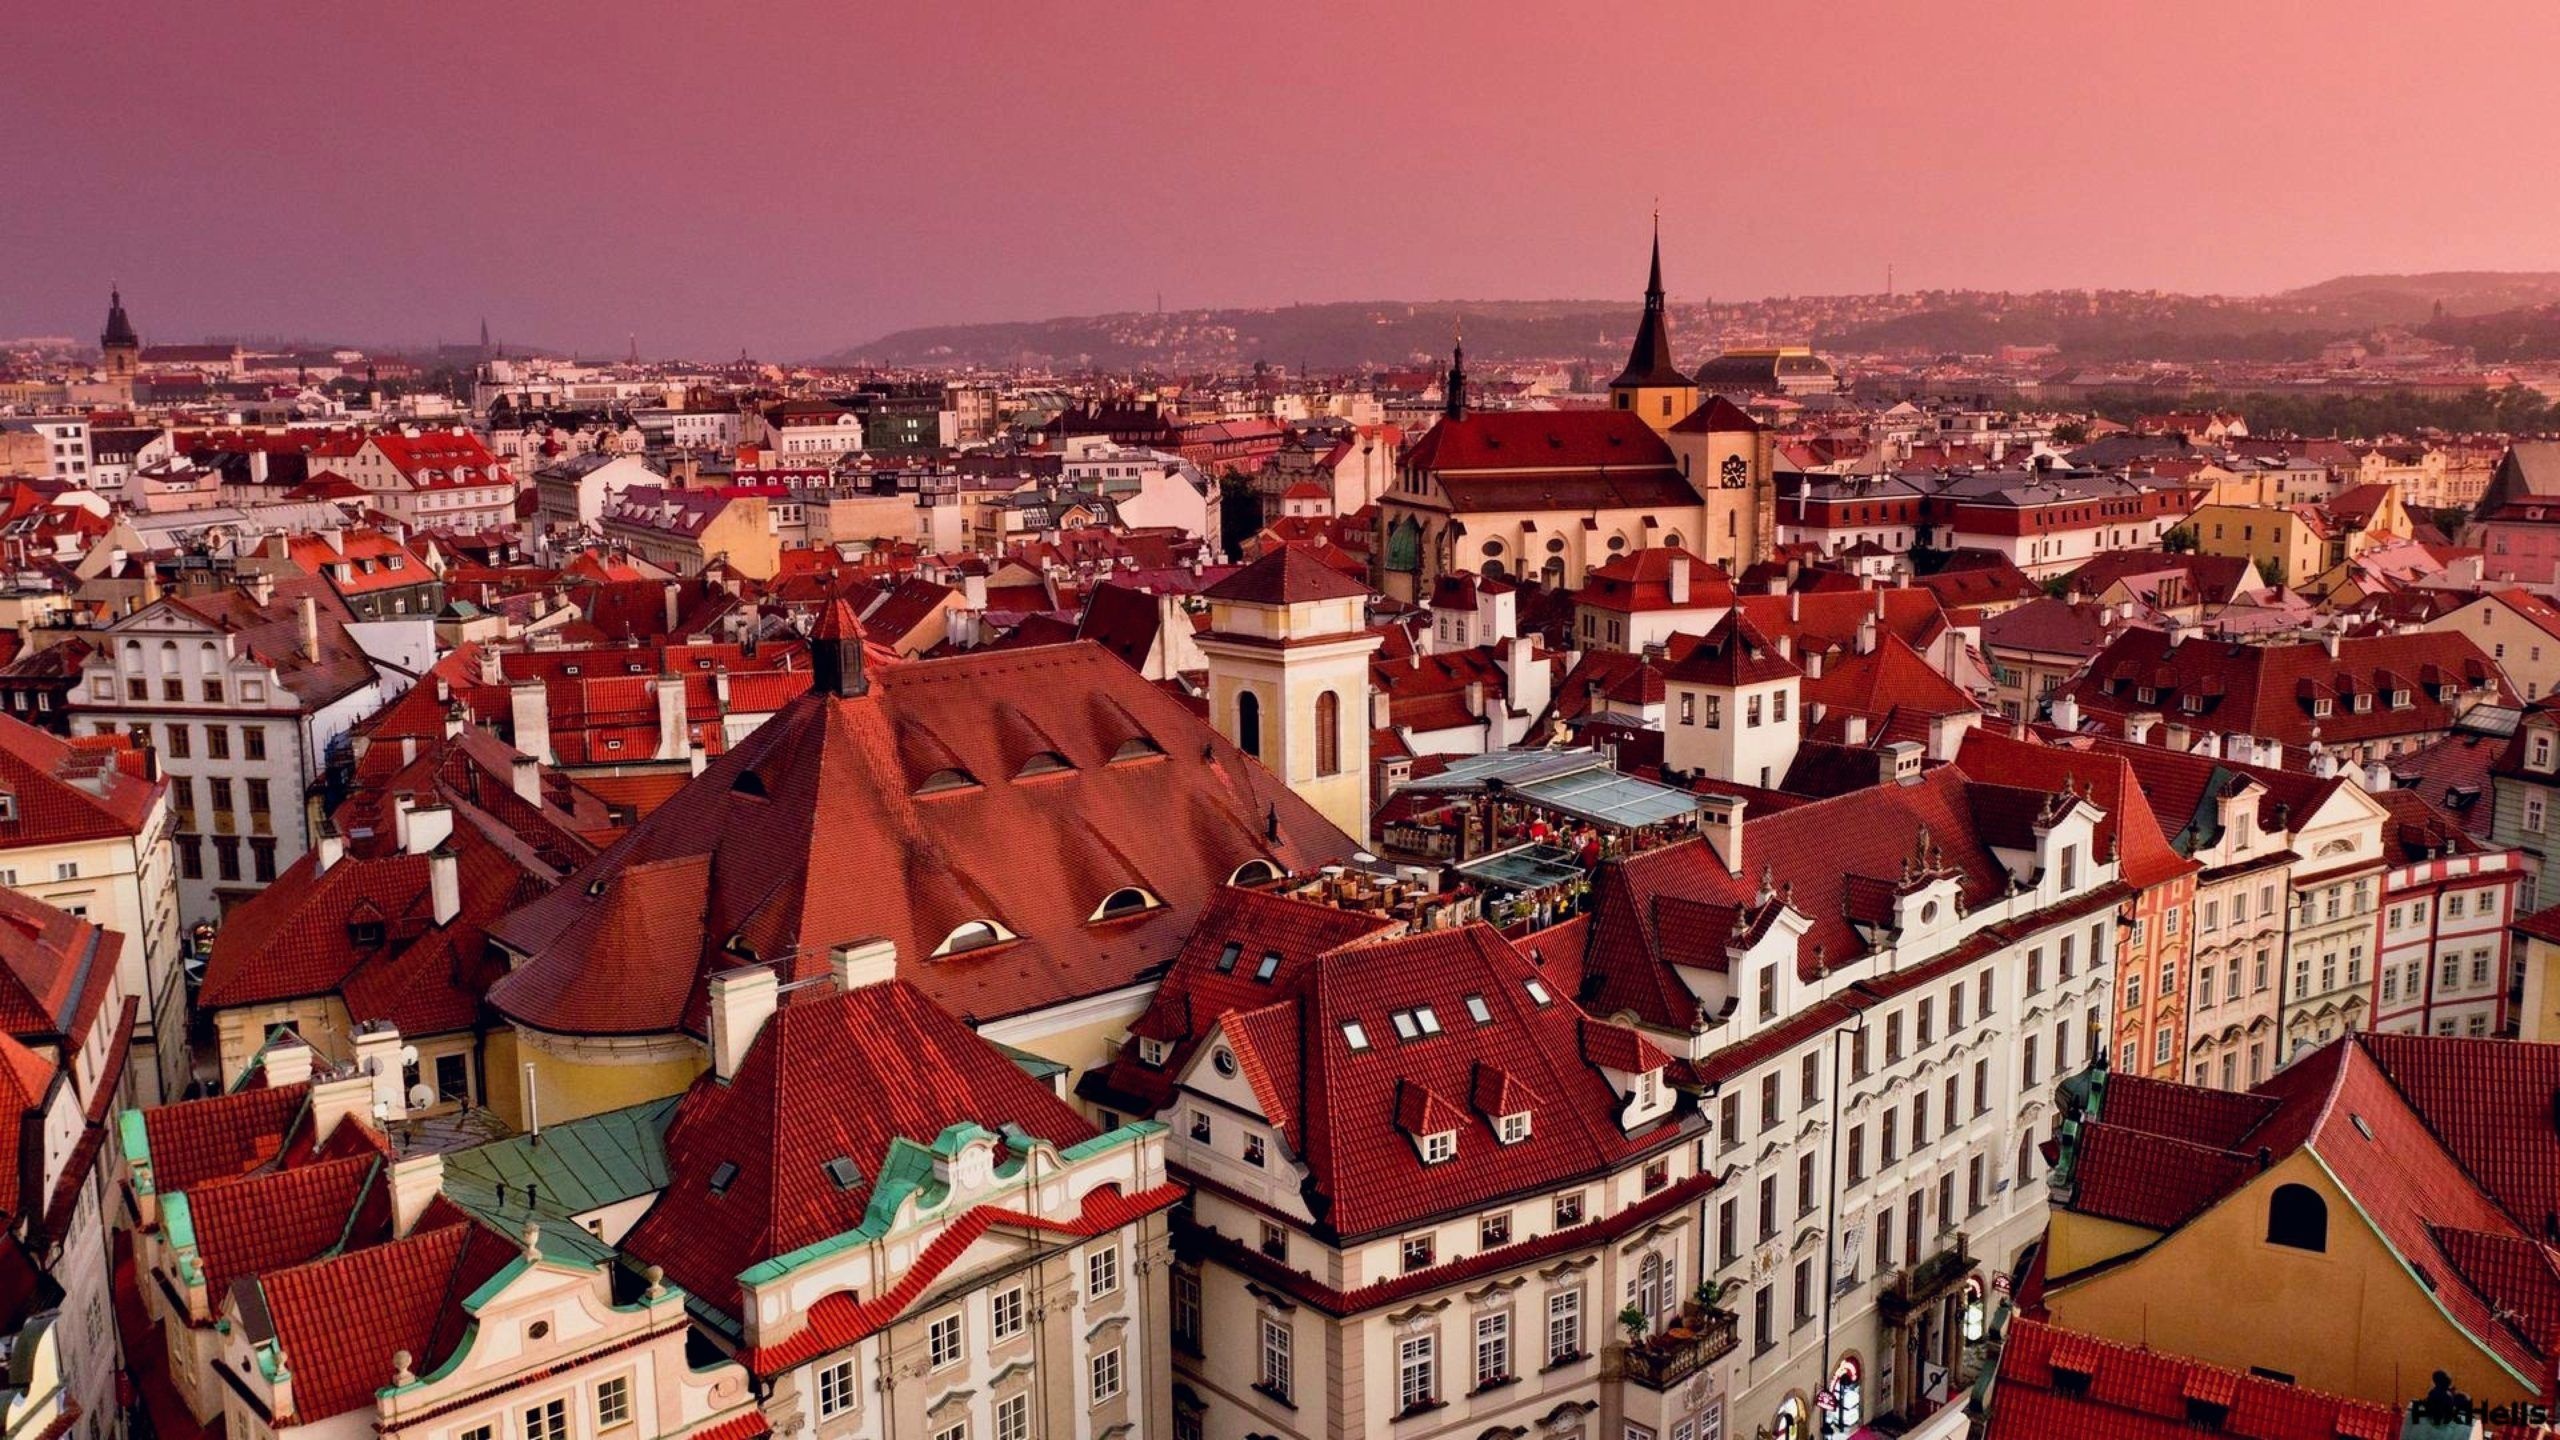 Prague: The city has a population of over 1.3 million people. 2560x1440 HD Wallpaper.